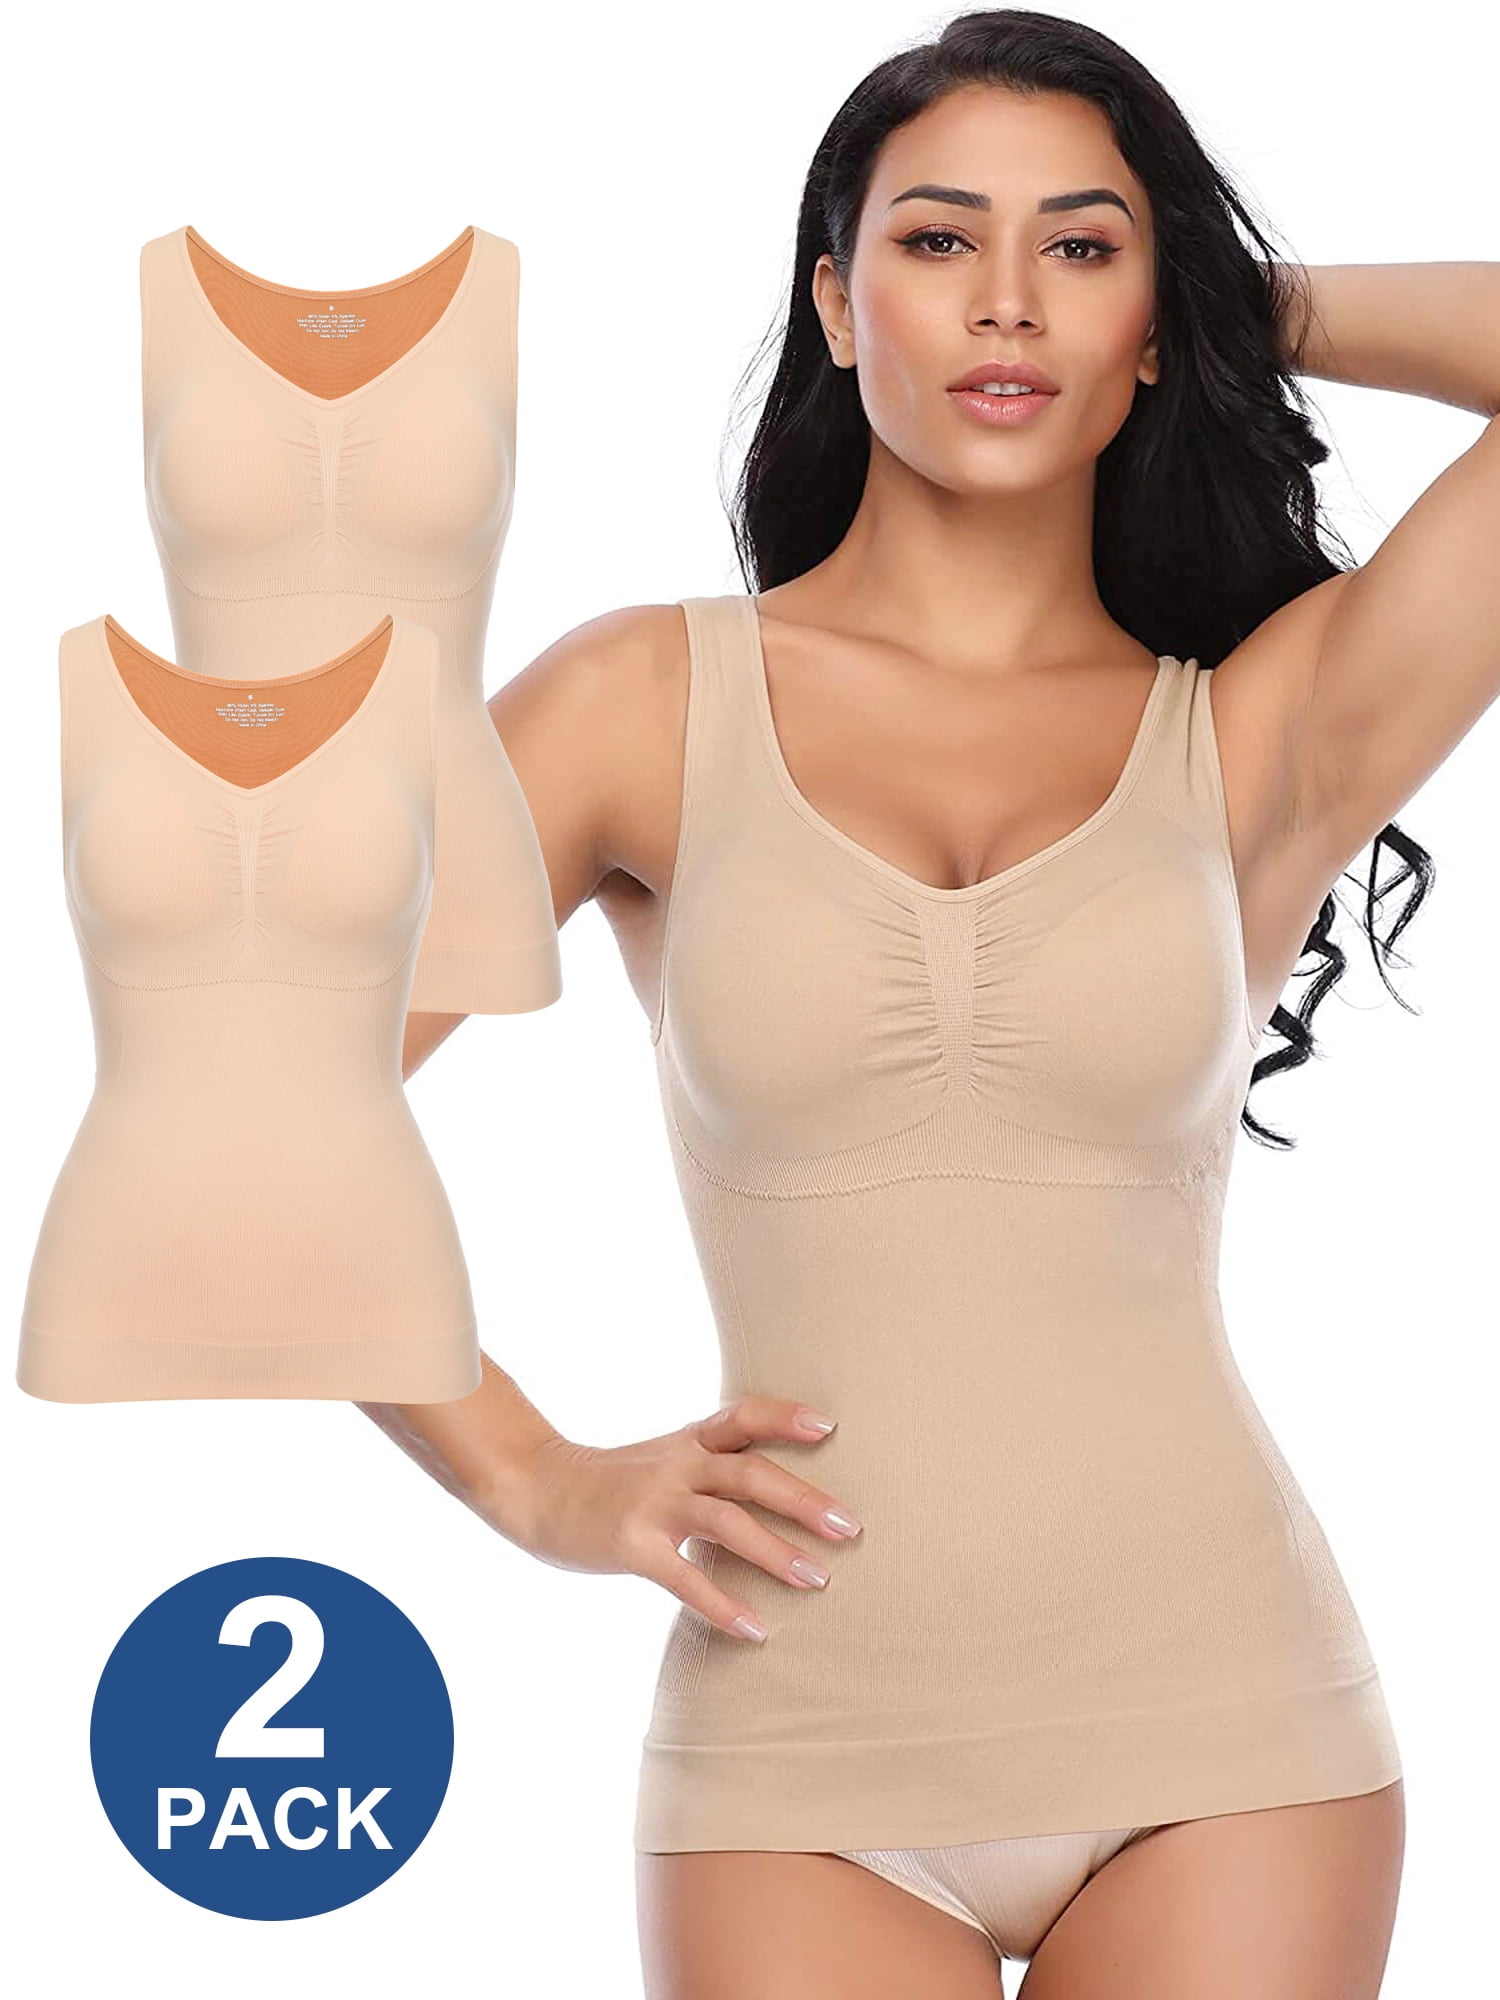 Women's Shapewear Cami With Built-In Bra, Tummy Control Compression Vest Top  Slimming Tank Top